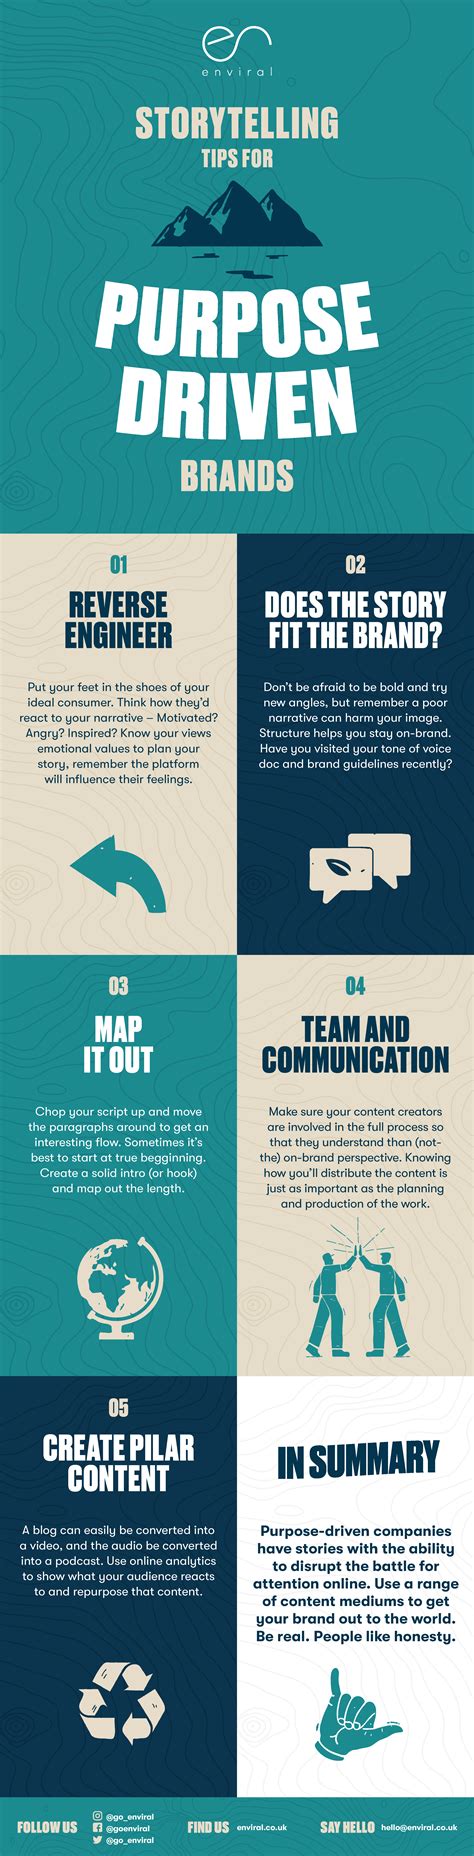 Enviral Purpose Driven Brands Infographic Enviral